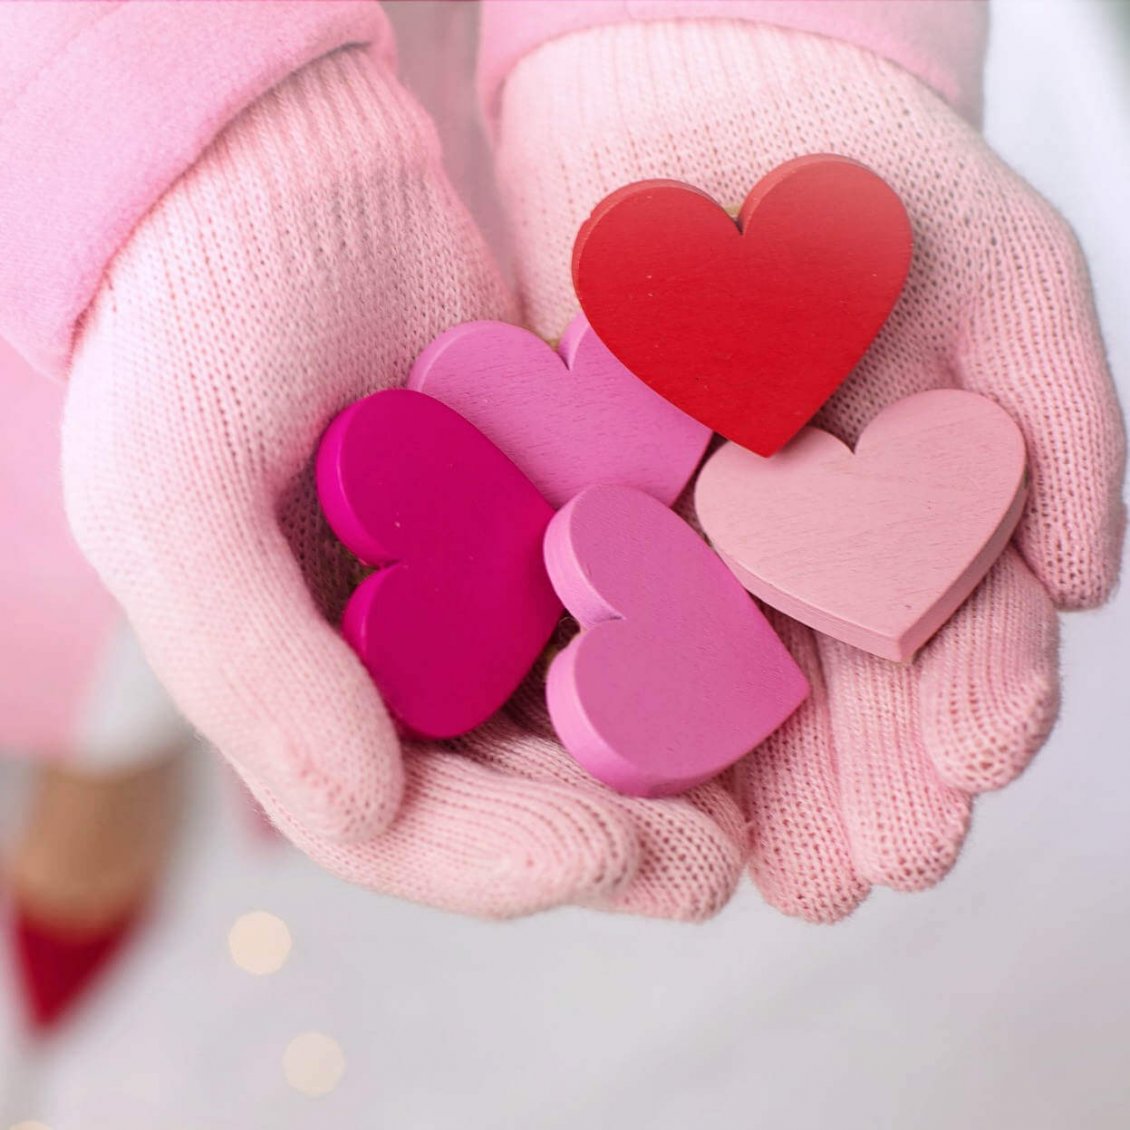 Download Wallpaper Painted wooden hearts on my hand - Love  red pink colors